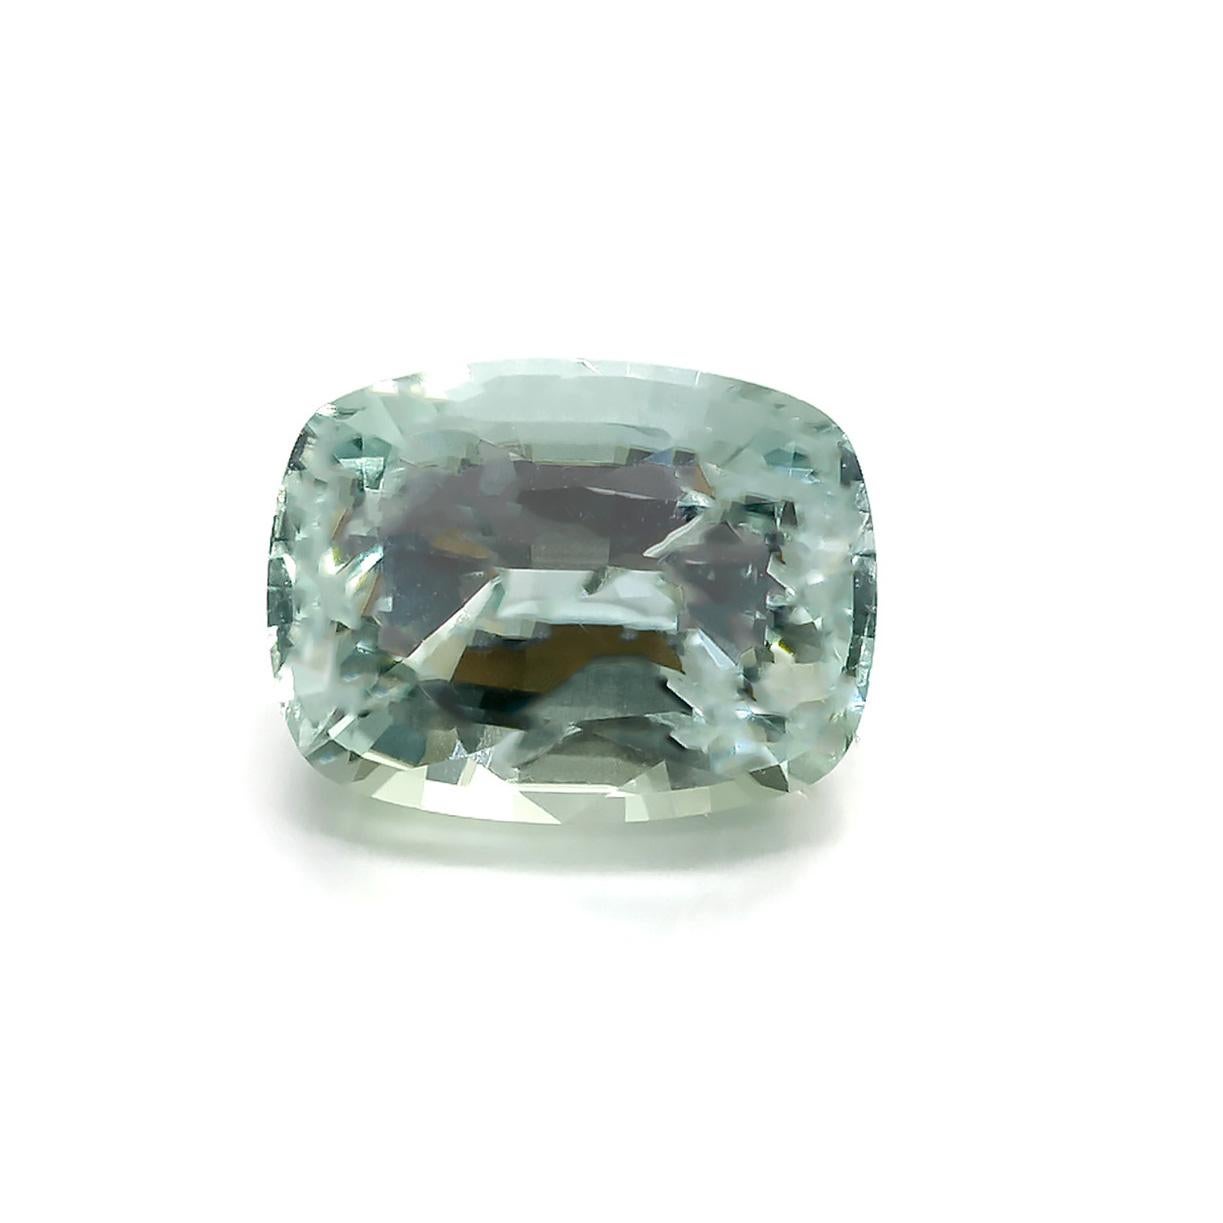 Unique Custom cut, 7.47carat mint green Tourmaline. Excellent brilliance and lots of reflection. Gemstones can be hard to get the exact color in 

1 cushion cut tourmaline, approx. total weight: 7.47cts   13.8x10.43x7.69mm 